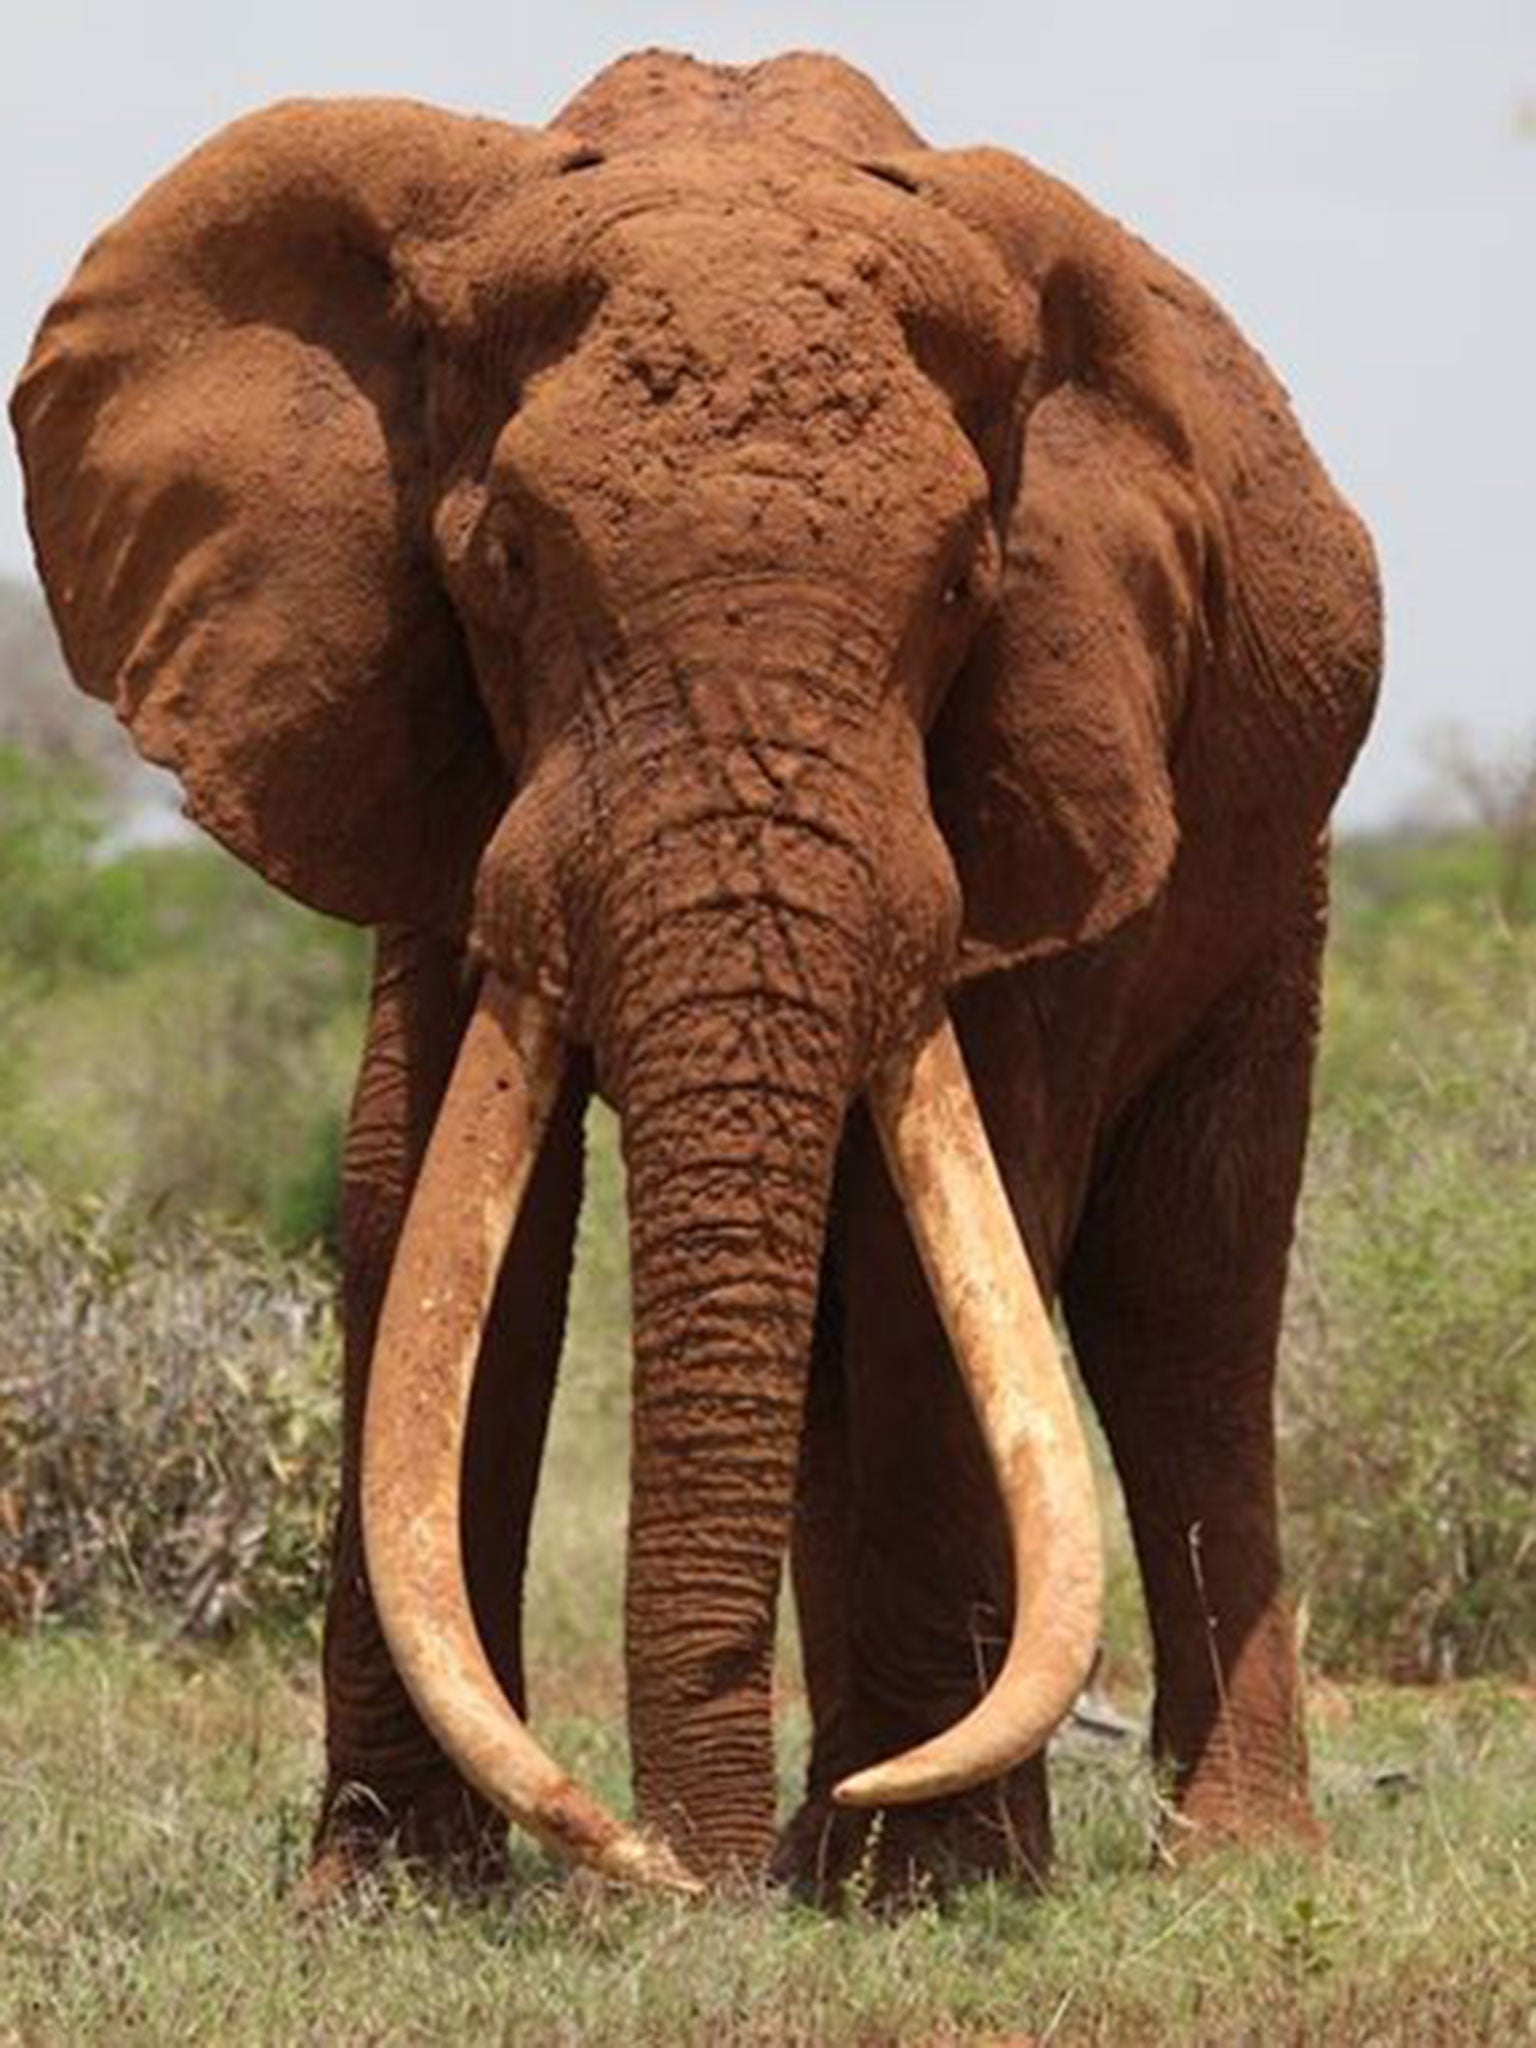 Satao, Kenya’s largest elephant, has died after being shot by poachers.